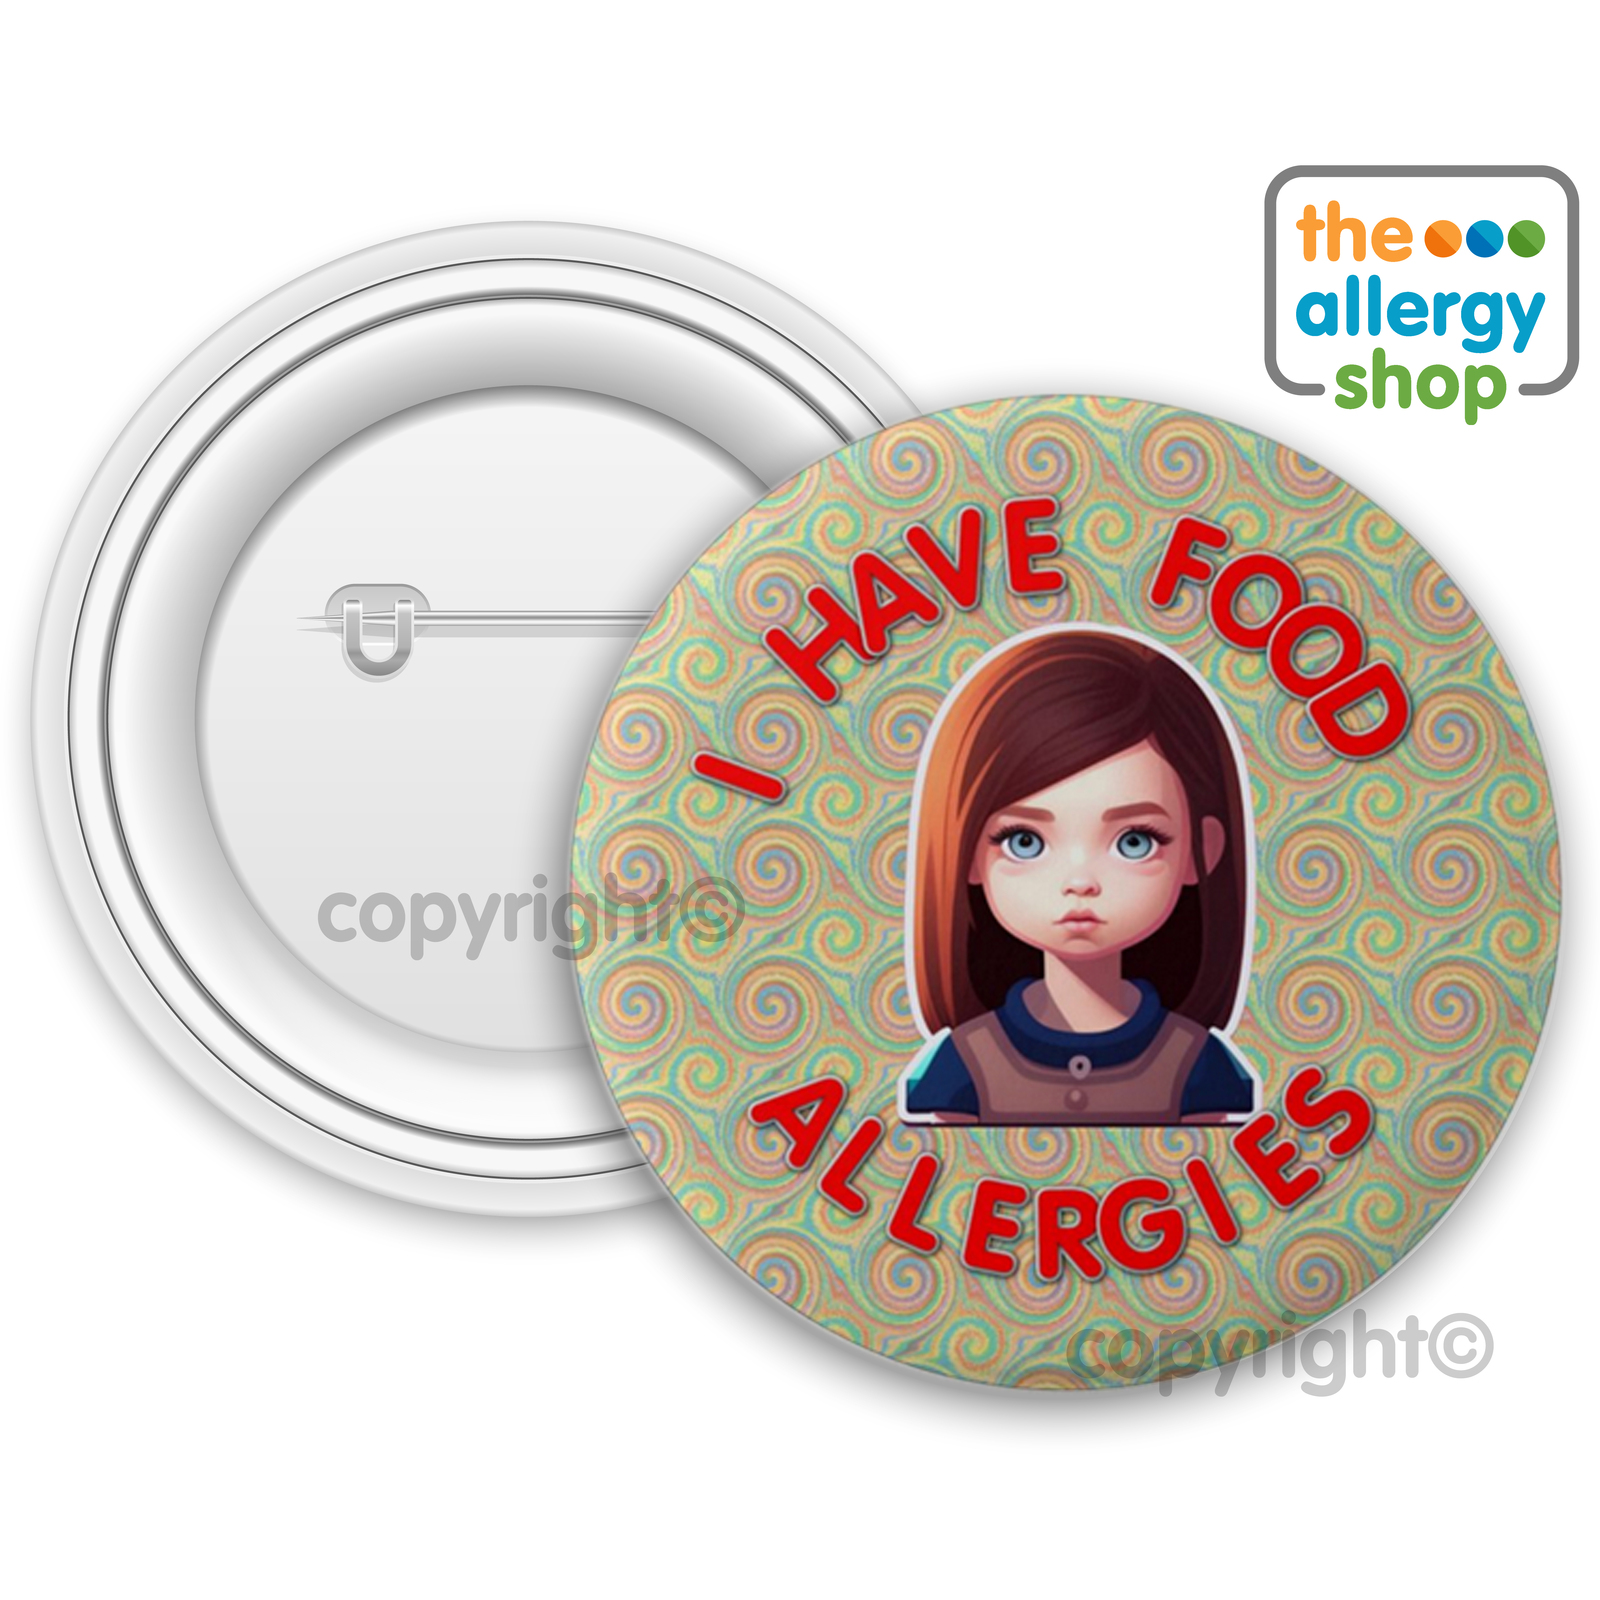 Allergy Alert and Warning Badges & Buttons for Your Safety and Peace of ...